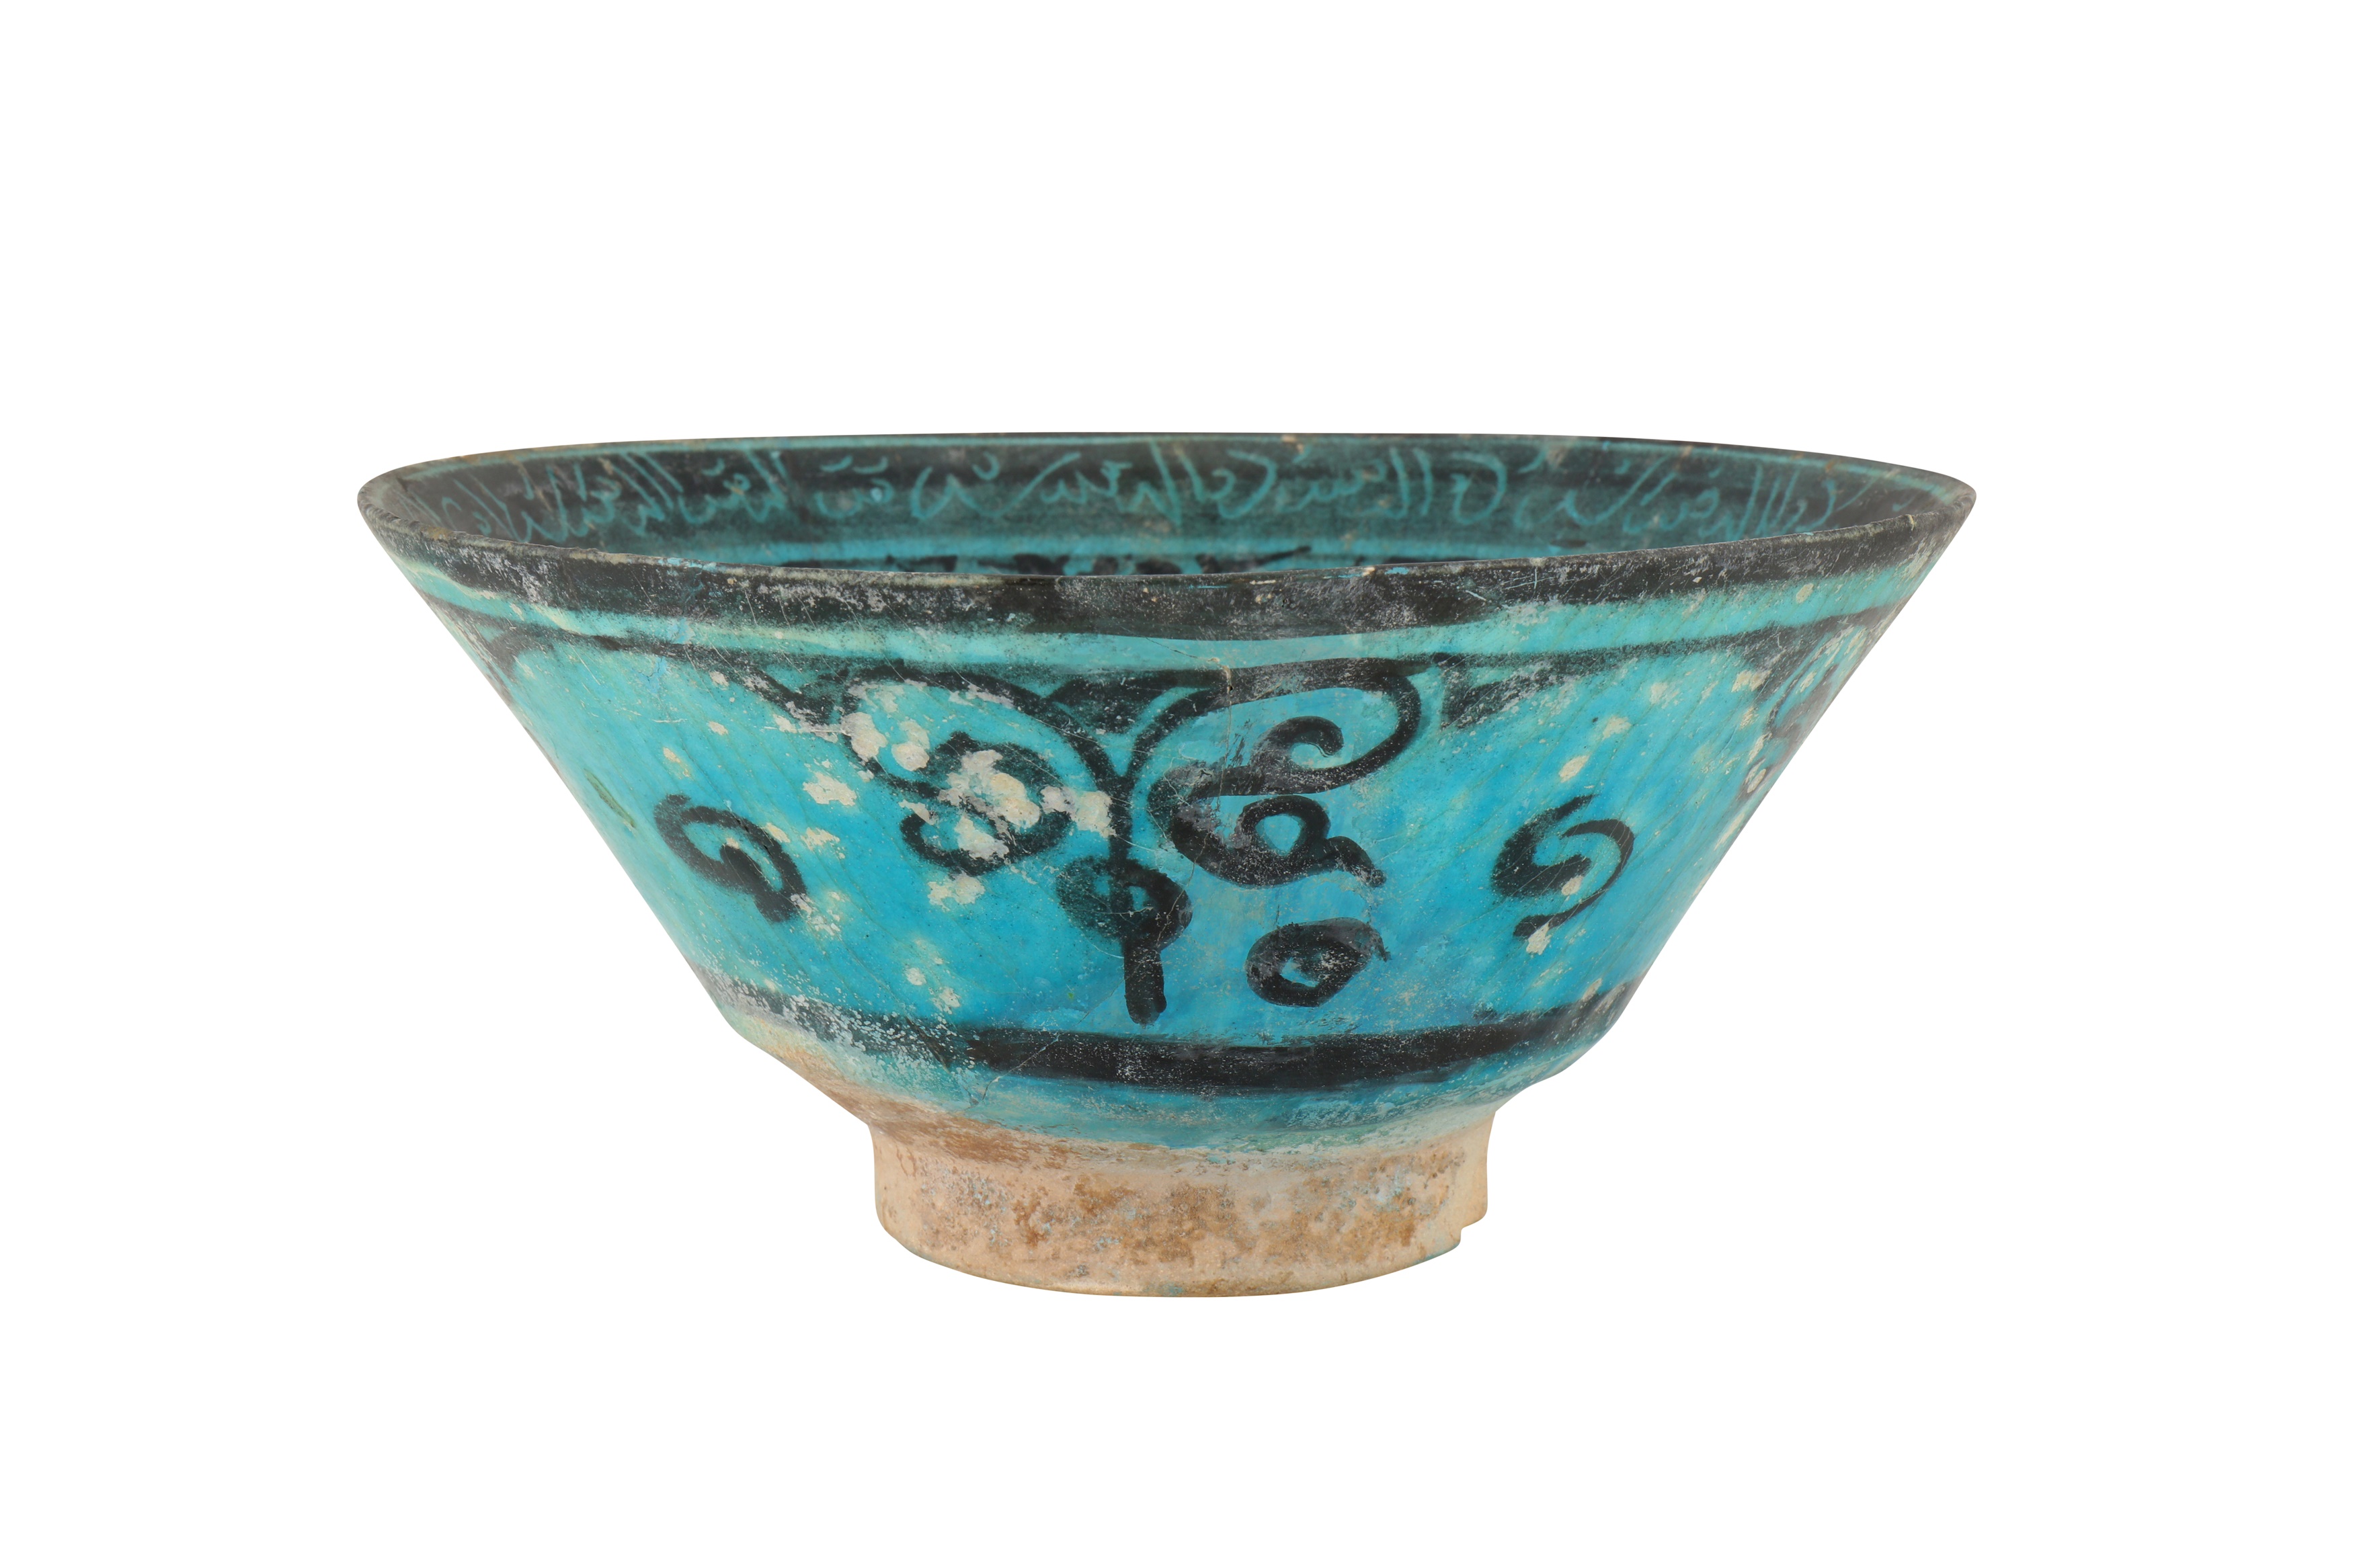 A 12TH CENTURY PERSIAN KASHAN SILHOUETTE-WARE POTTERY BOWL - Image 2 of 4